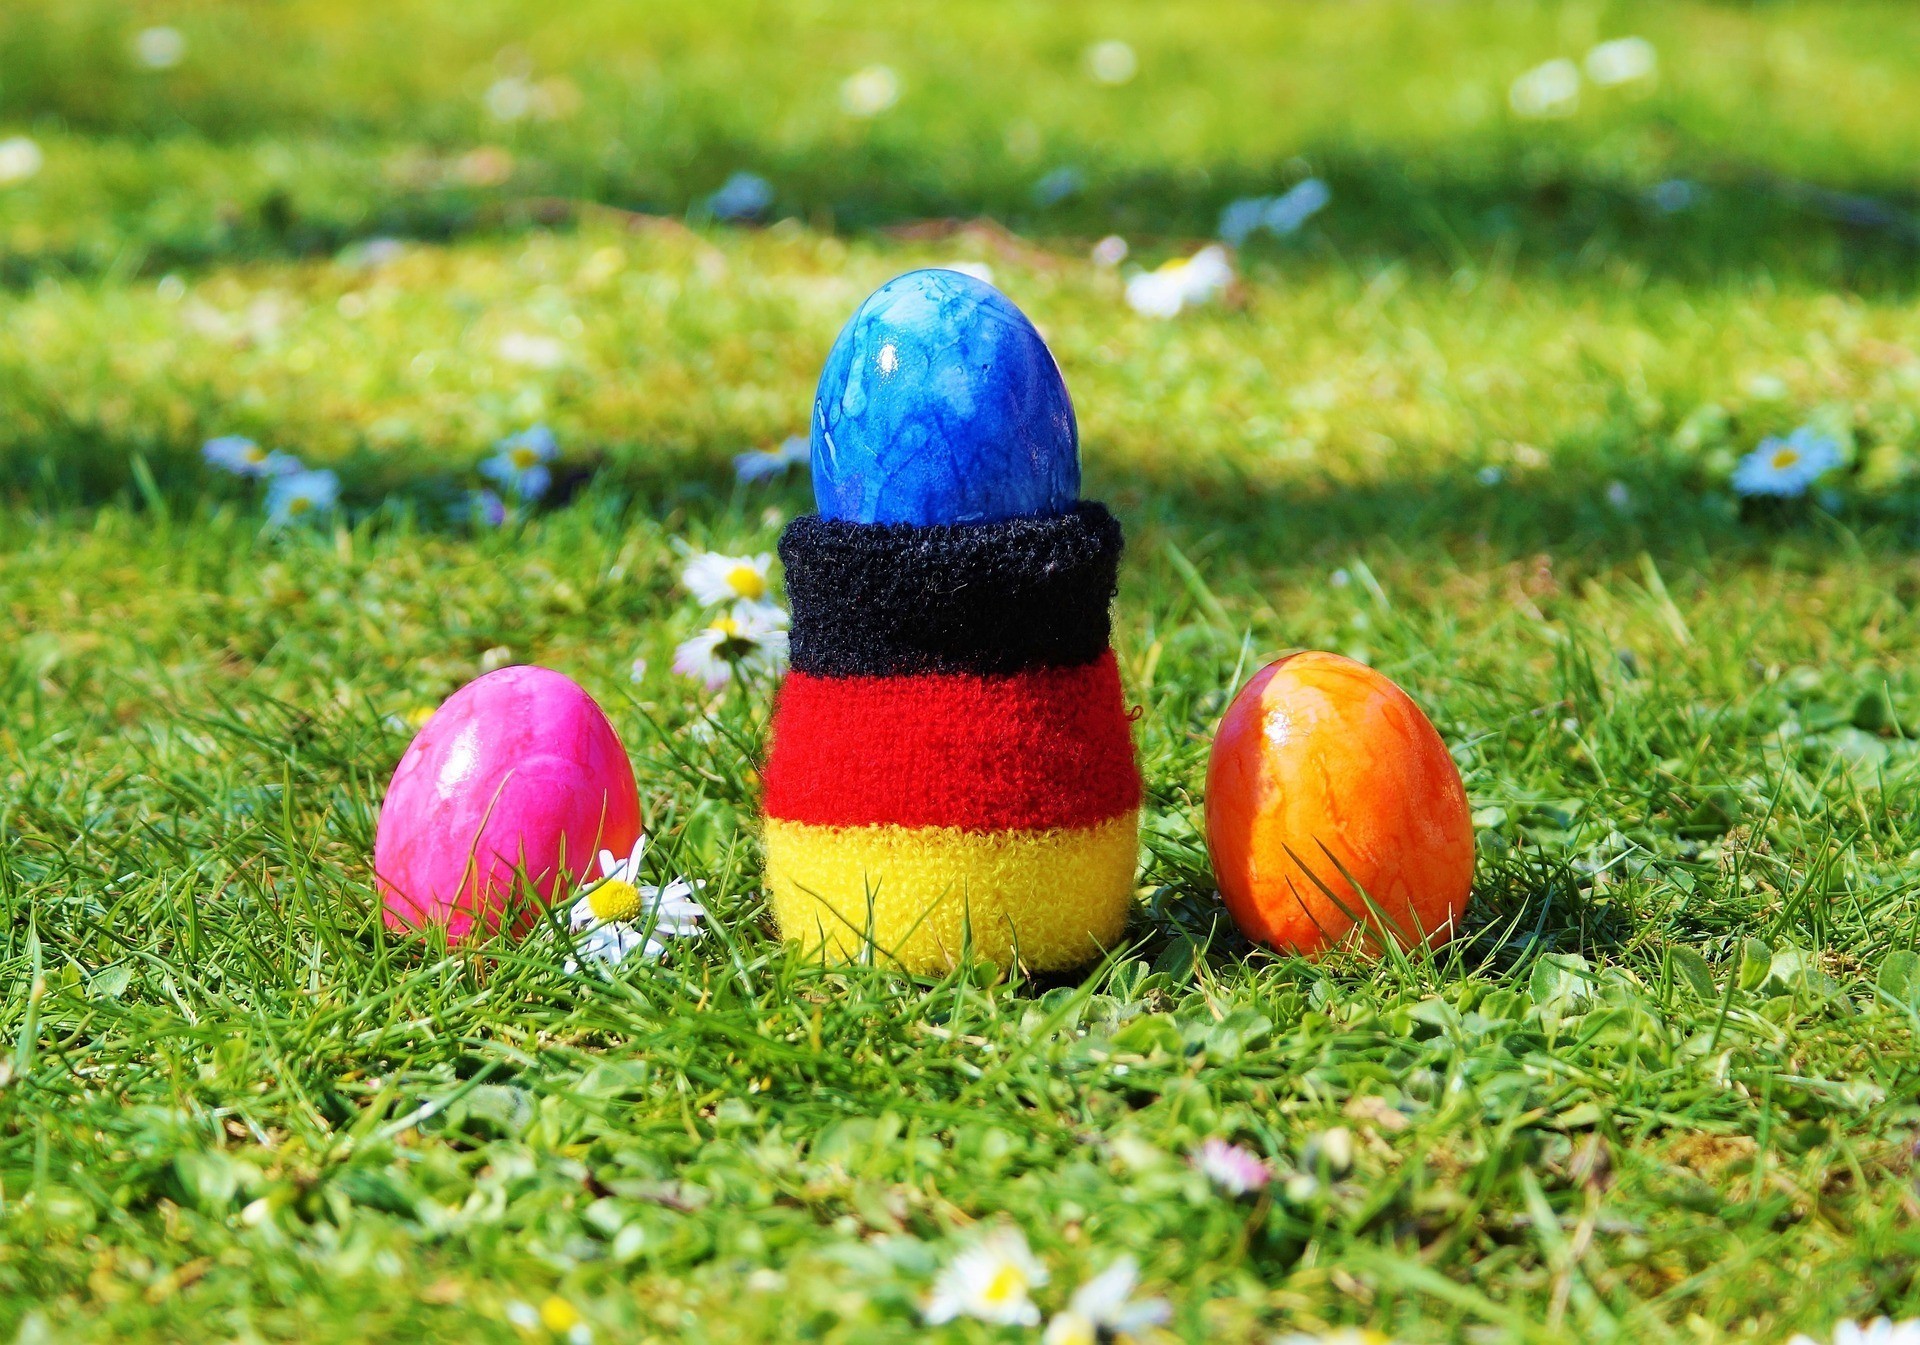 German traditions include Easter fires, egg hunts, lambshaped cakes